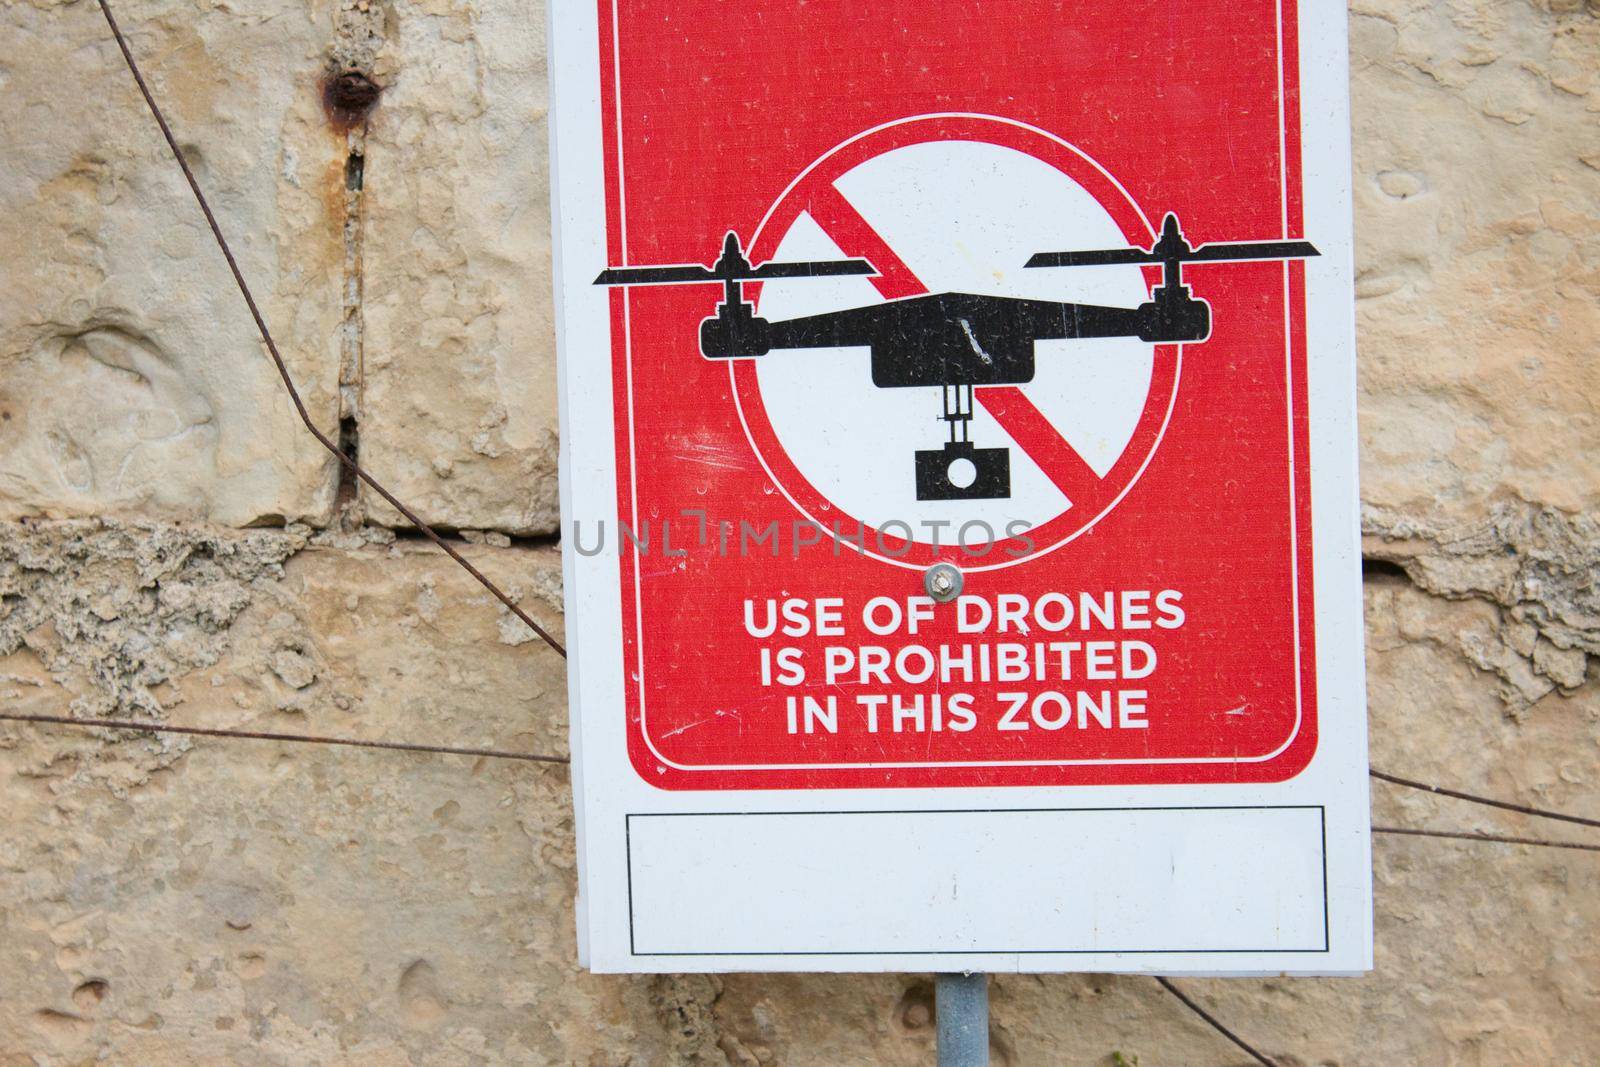 A red sign that reads "Use of drones is prohibited in this zone" against a brick wall